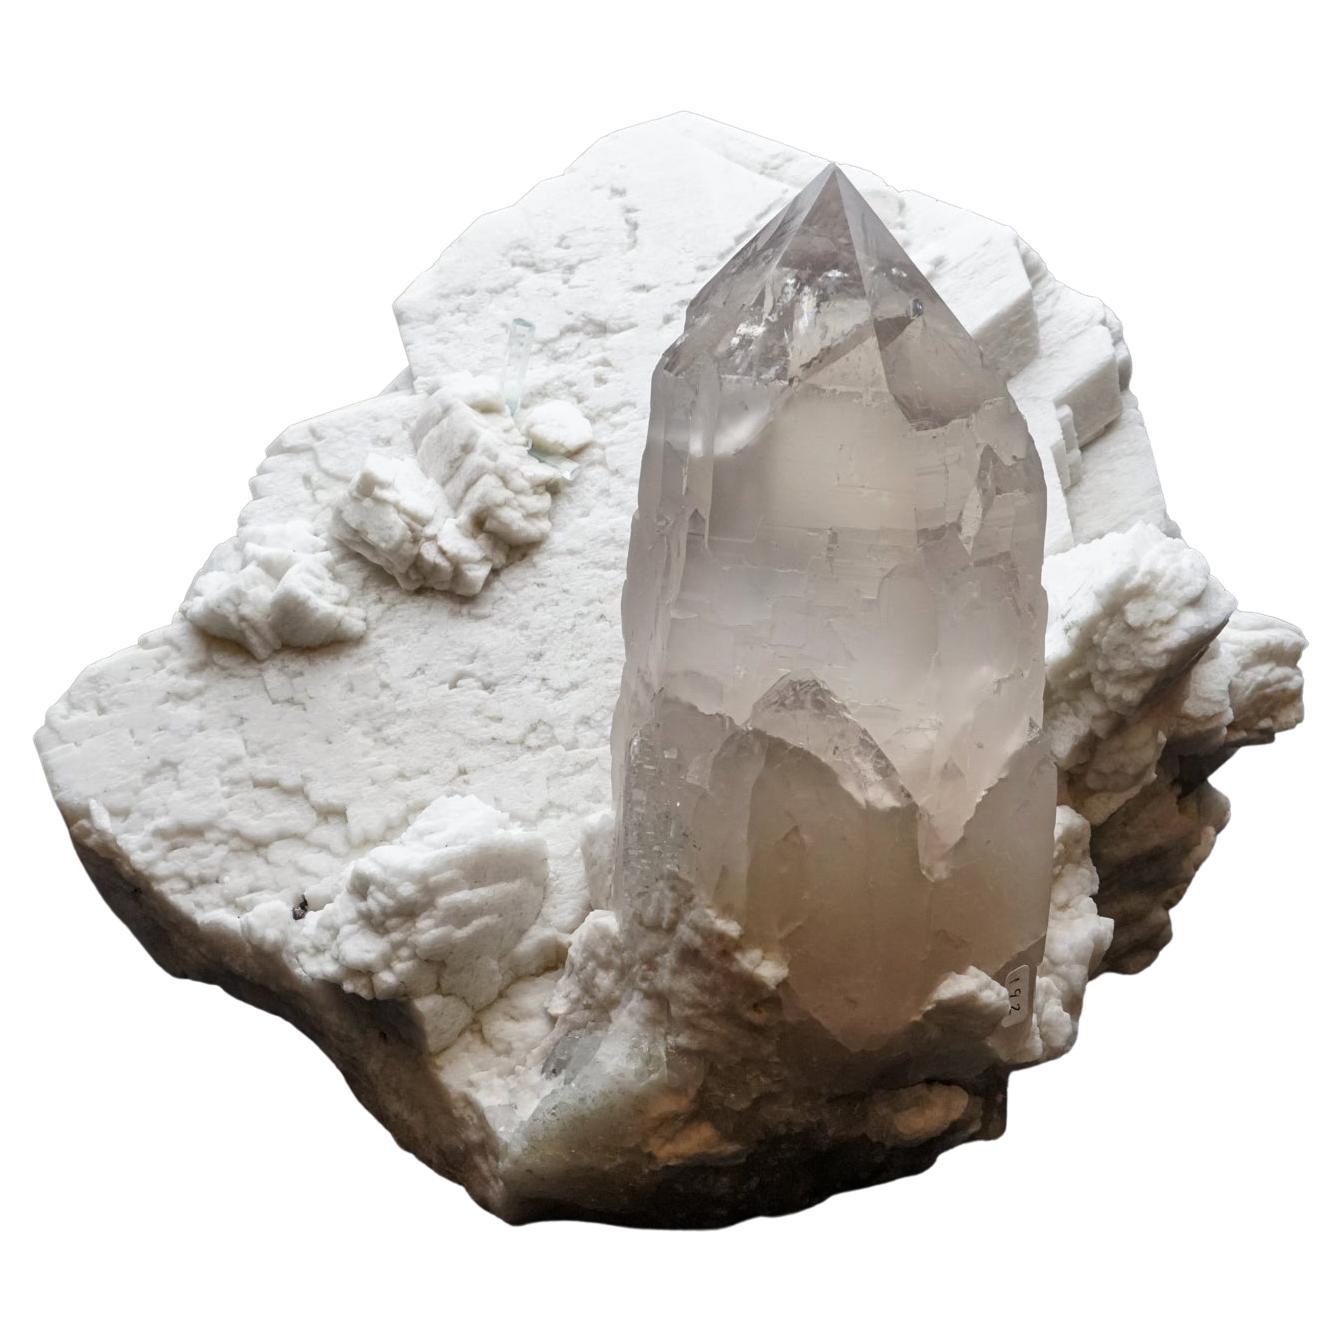 Natural Quartz Point on White Feldspar Crystal From Himalaya Mountains, India For Sale